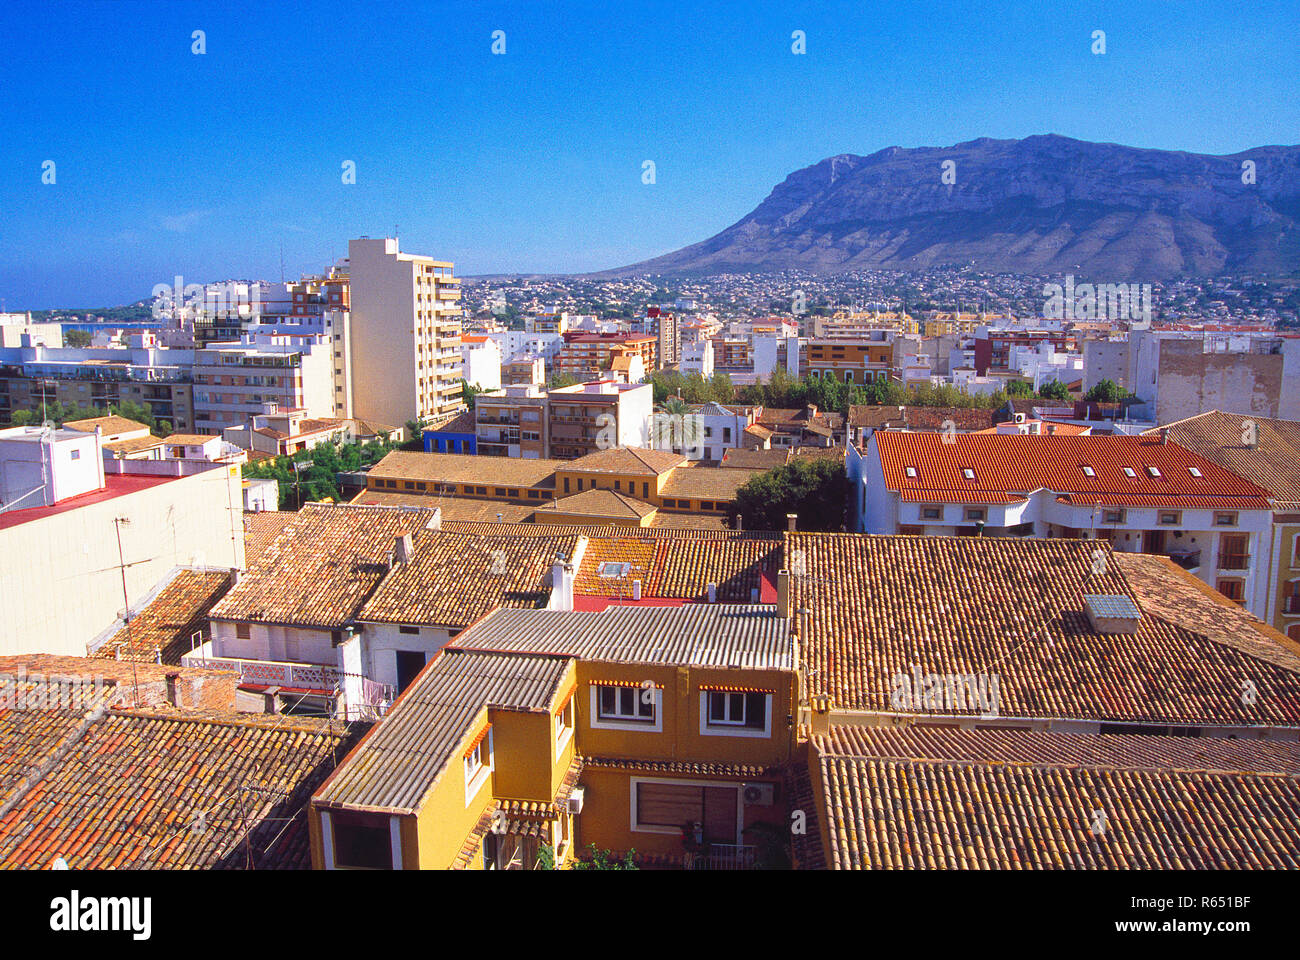 Overview of the town from the castle. Denia, Alicante province, Comunidad Valenciana, Spain. Stock Photo